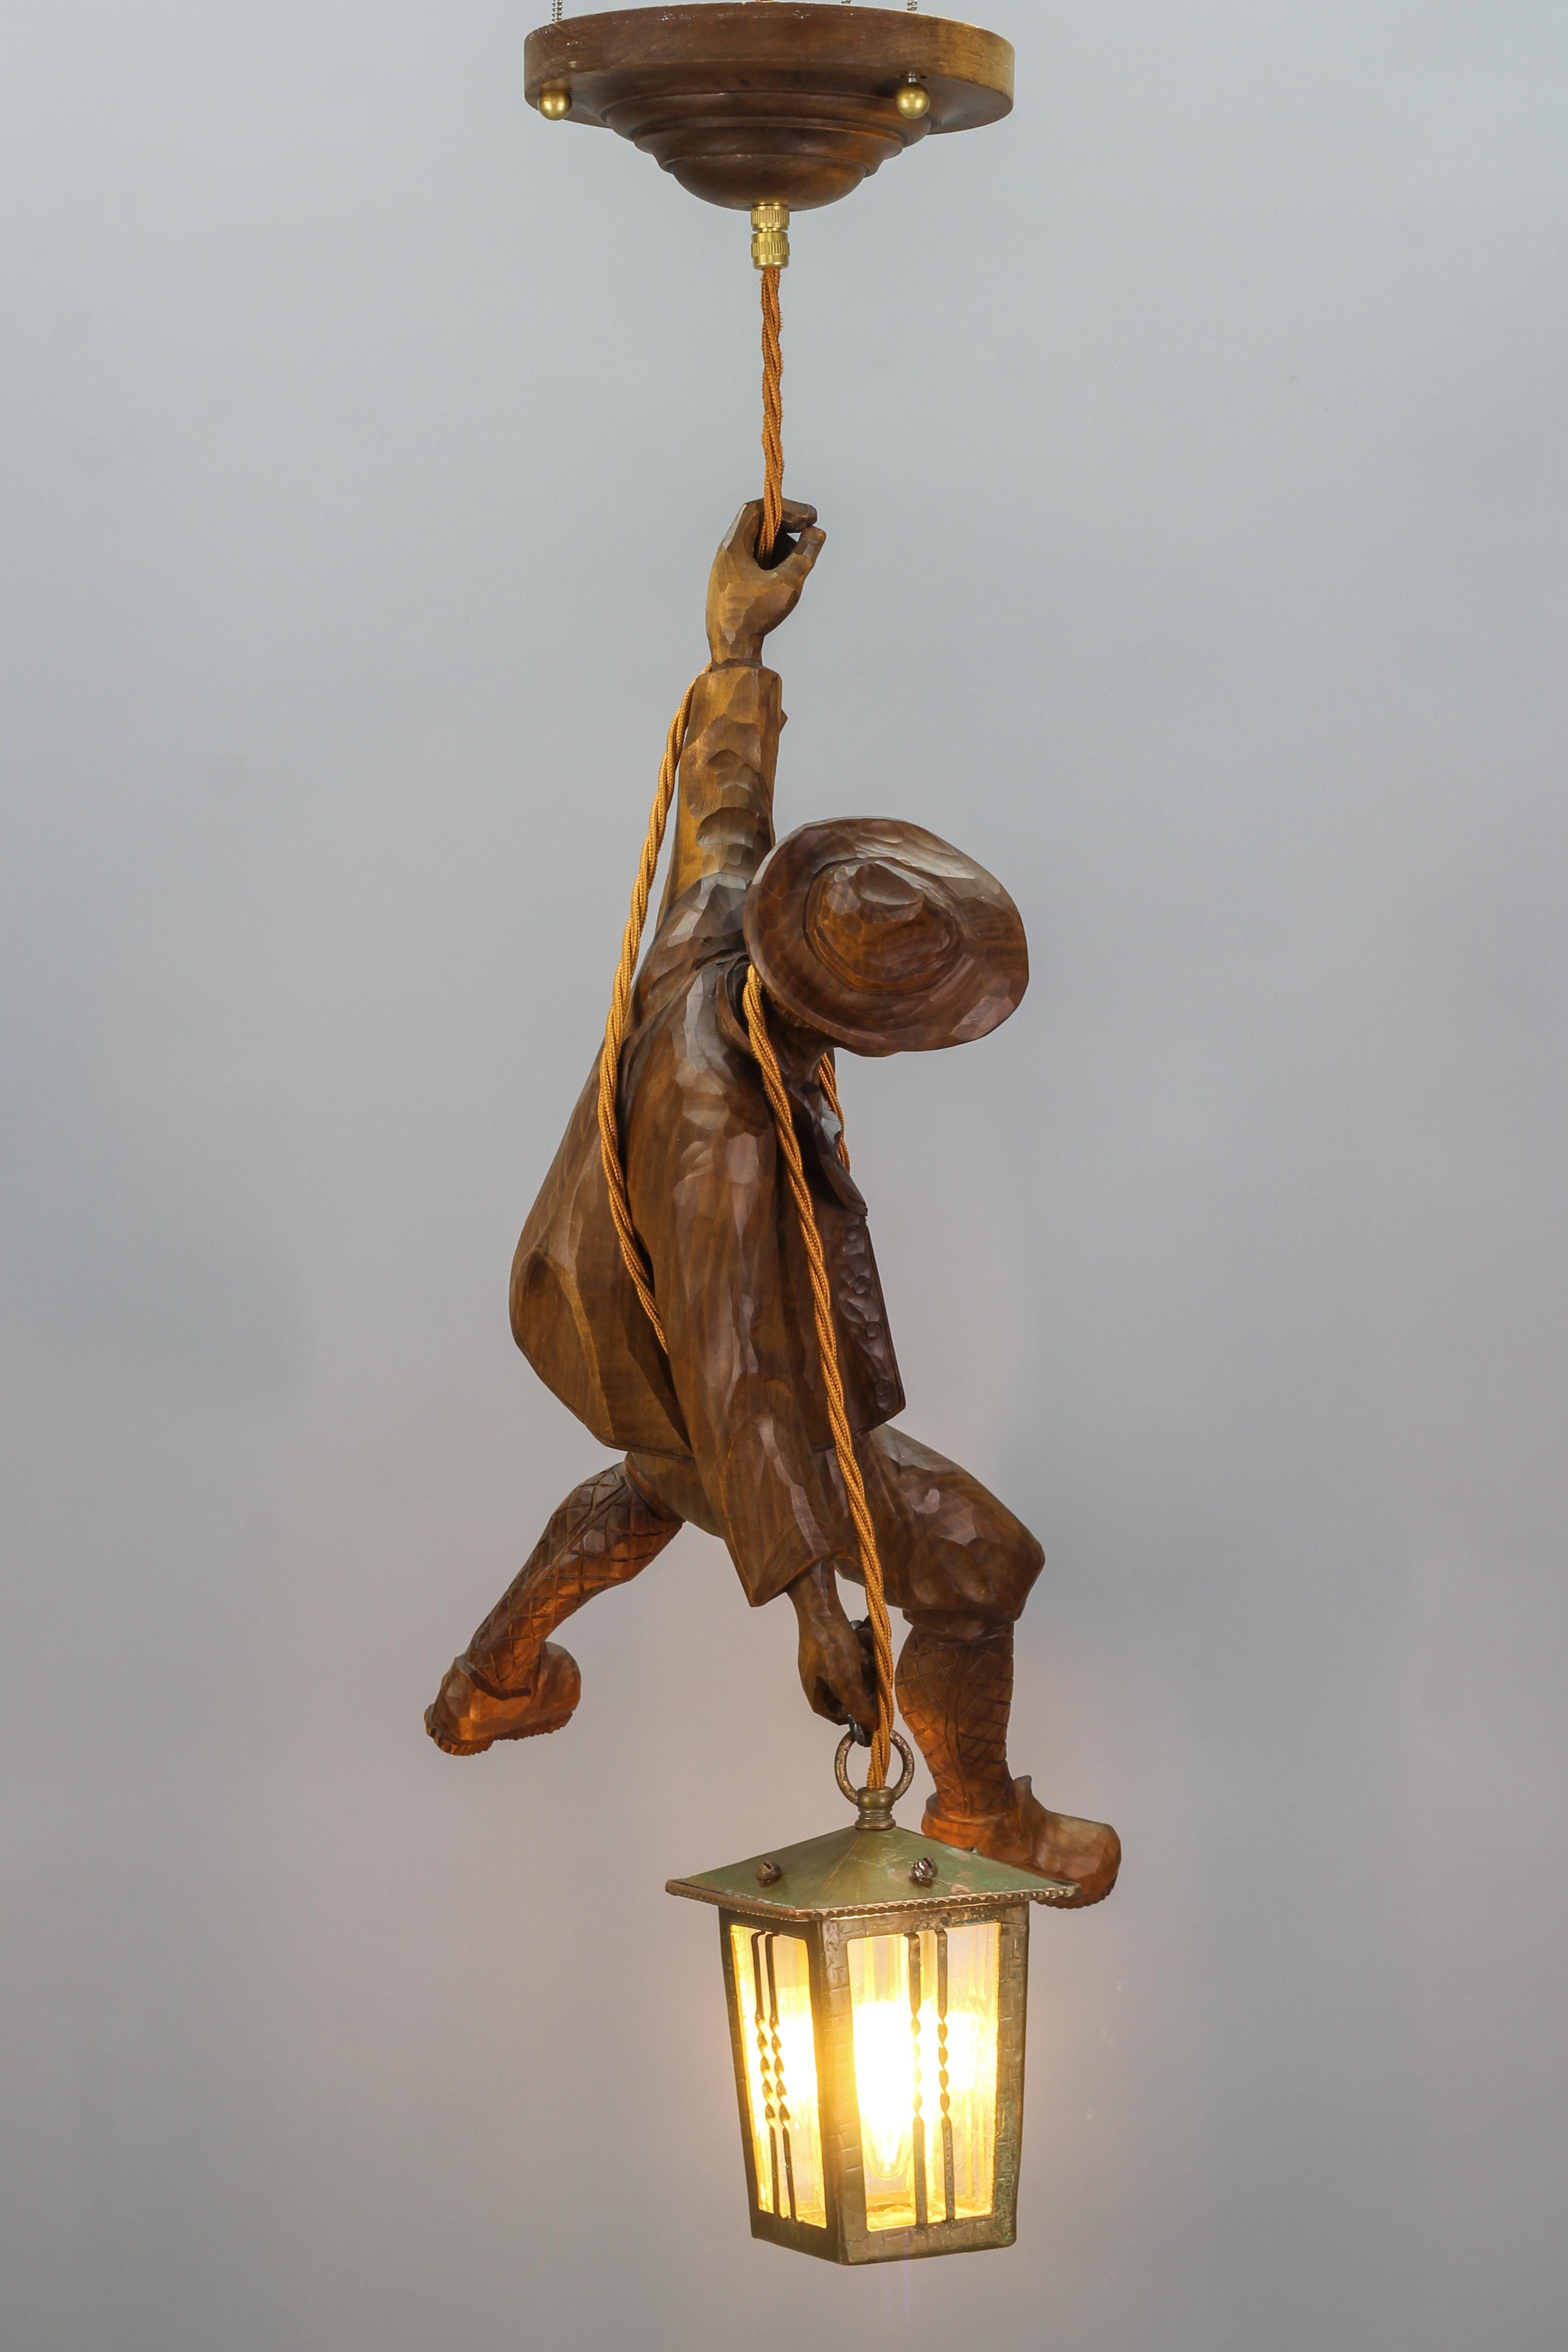 German Pendant Light with a Carved Wooden Figure of Mountain Climber and Lantern In Good Condition For Sale In Barntrup, DE